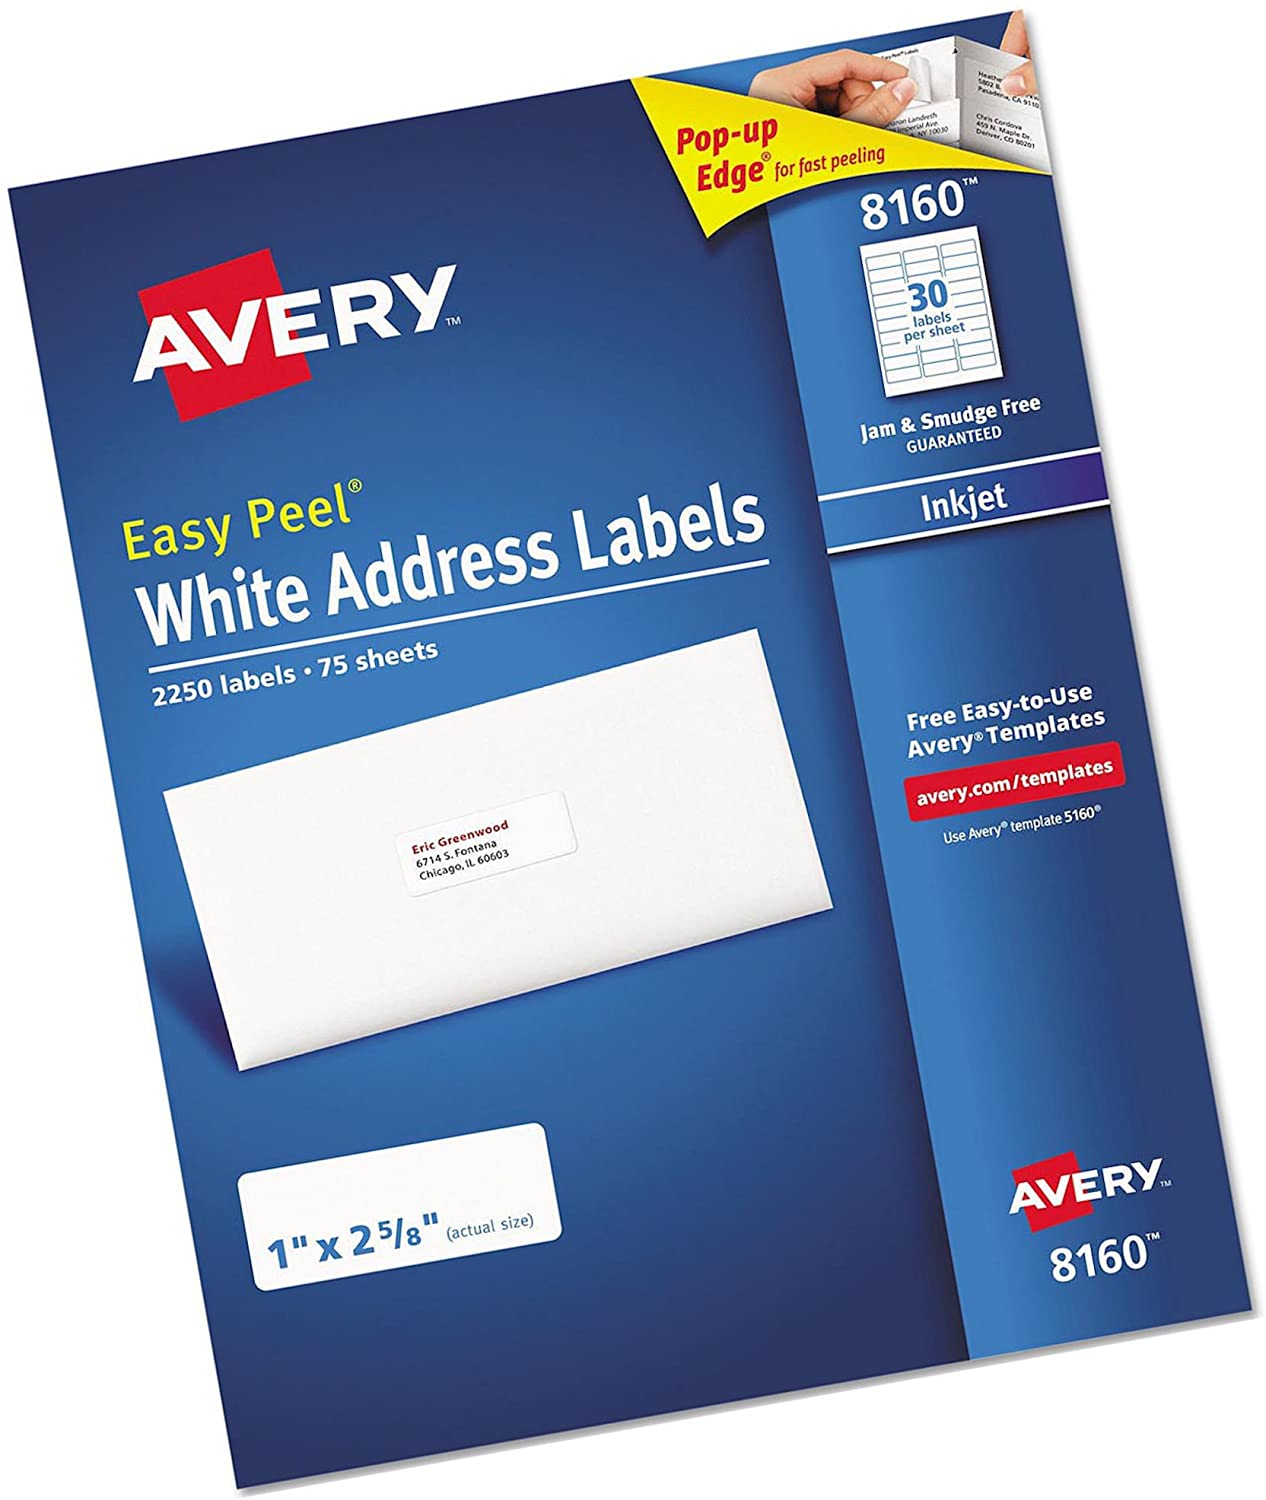 Avery Template 8160. Template 8160. Address Labels. 1" x 2-5/8". 30 per Sheet, White Custom Printing. LabelsCardsTags & TicketsView All Custom Printing.